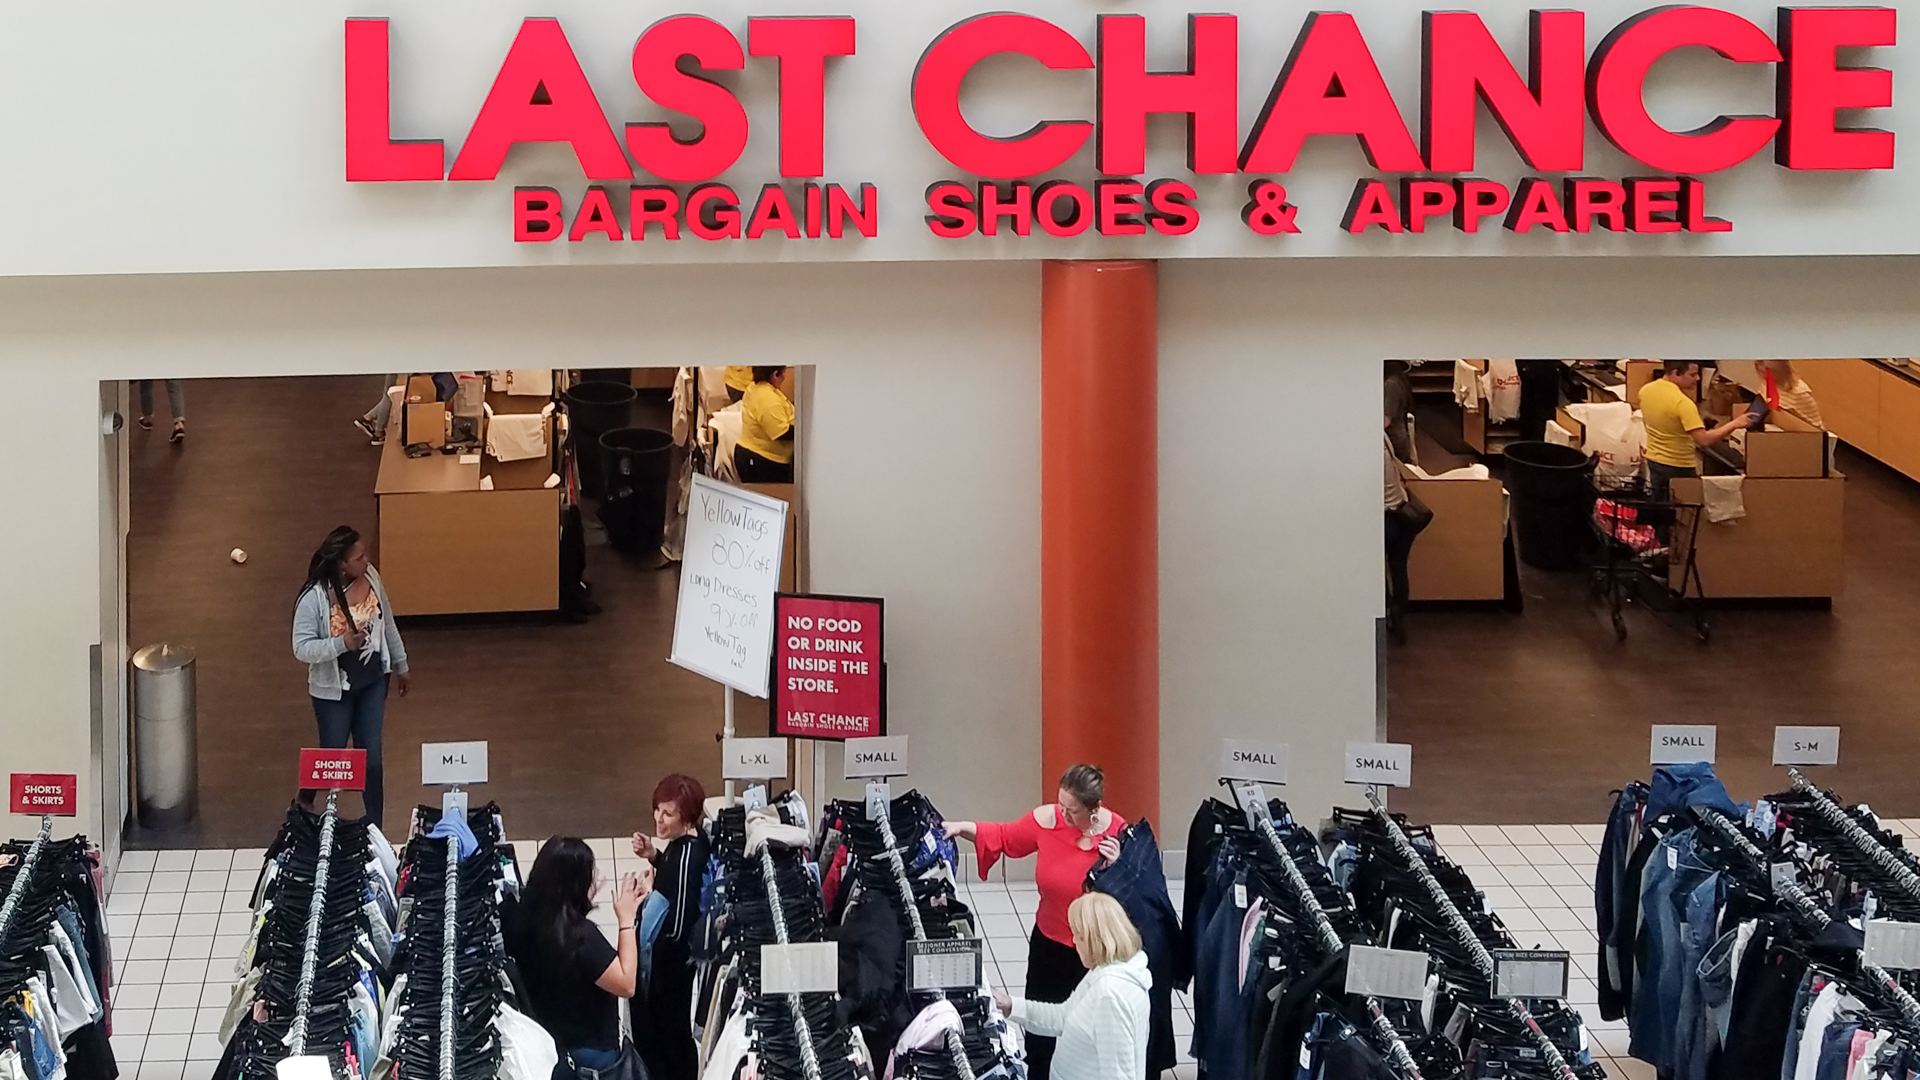 Everyone's Spending More and More Money at Nordstrom Rack - Racked